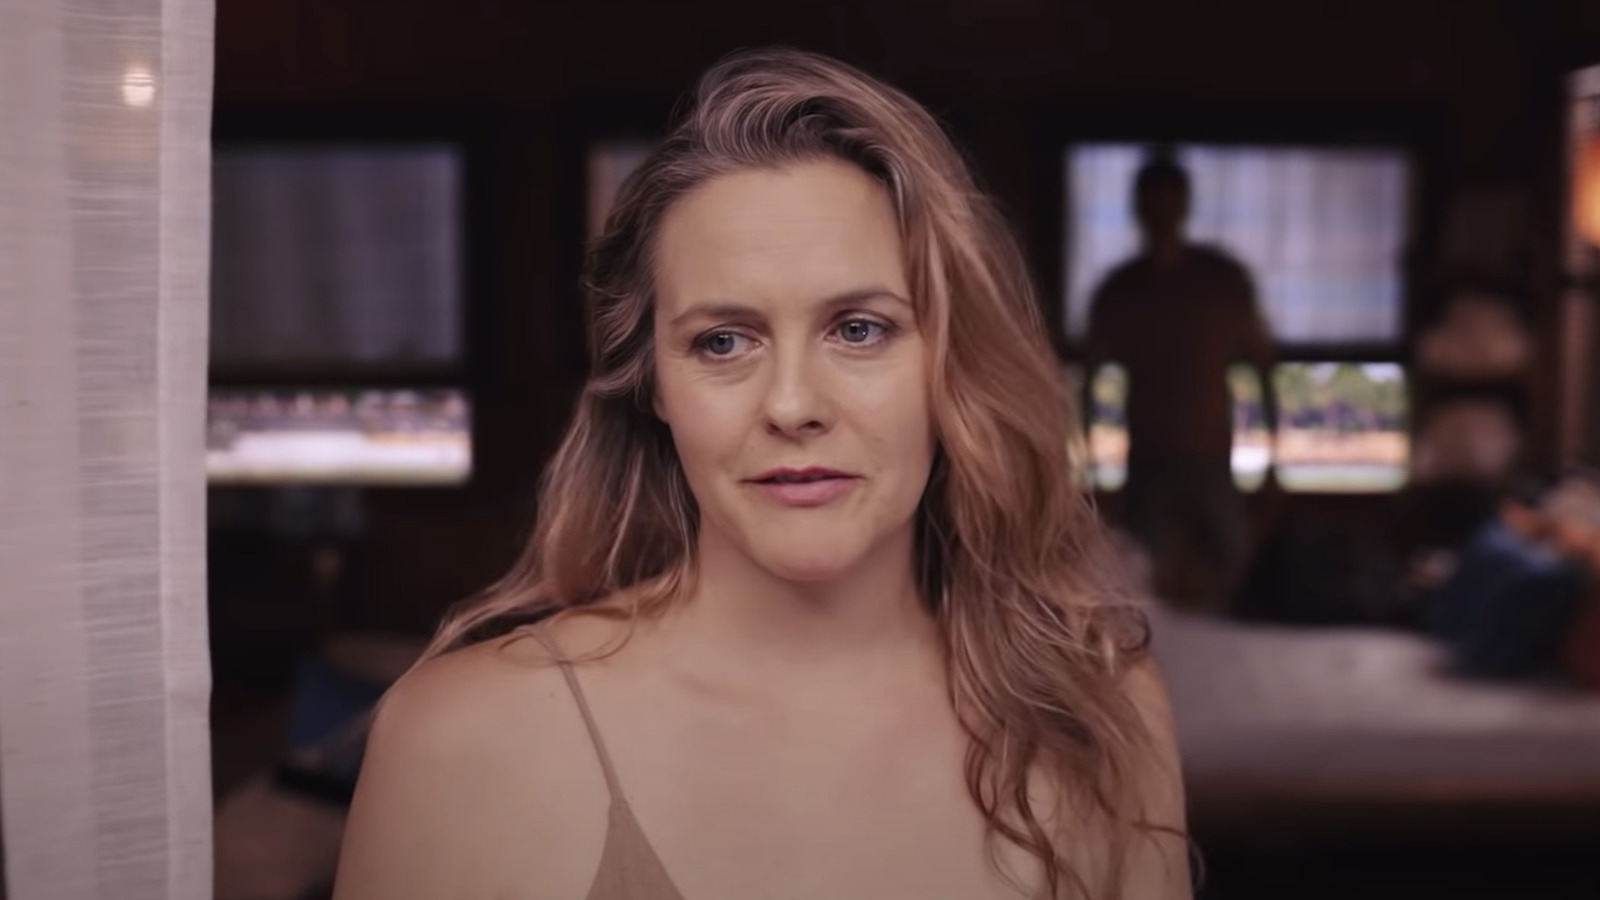 https://www.slashfilm.com/img/gallery/alicia-silverstone-on-surviving-the-shark-infested-waters-of-the-requin-interview/l-intro-1643304724.jpg